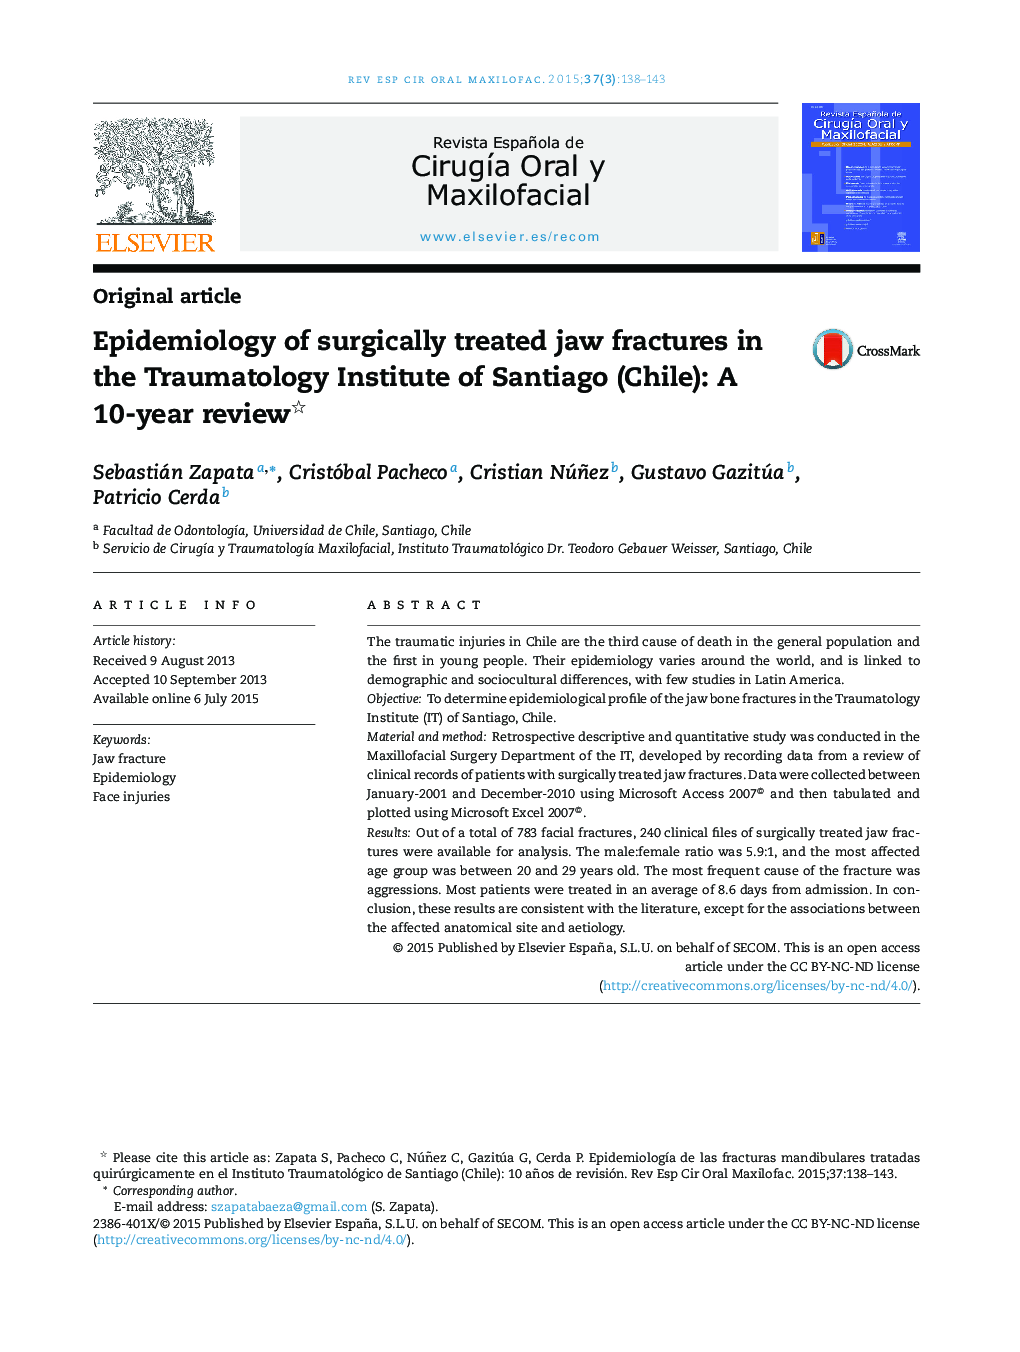 Epidemiology of surgically treated jaw fractures in the Traumatology Institute of Santiago (Chile): A 10-year review 